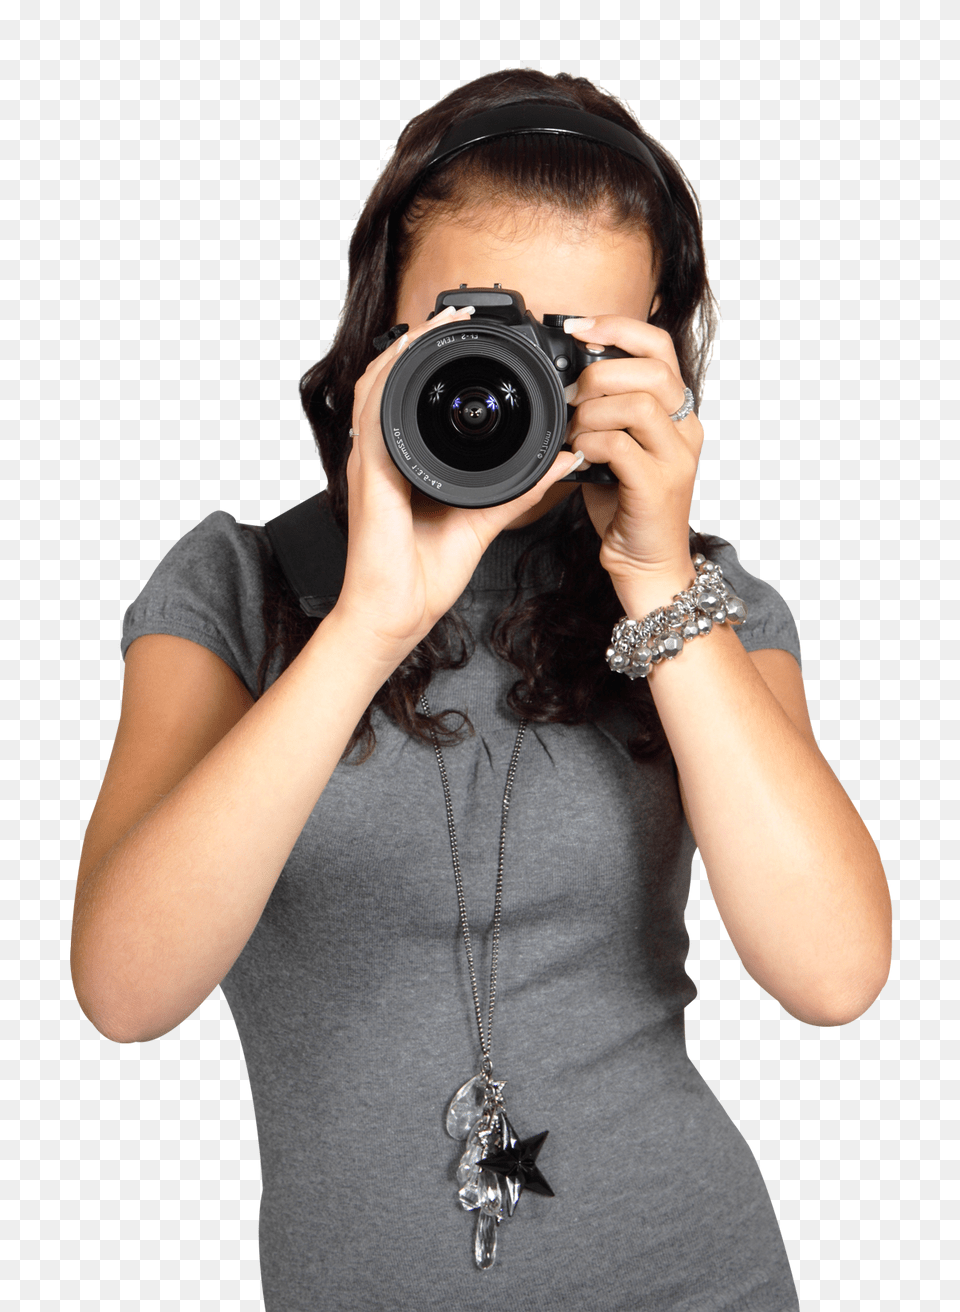 Pngpix Com Cute Young Woman In Gray Dress With Digital Photo Camera Image, Electronics, Photography, Adult, Female Free Transparent Png